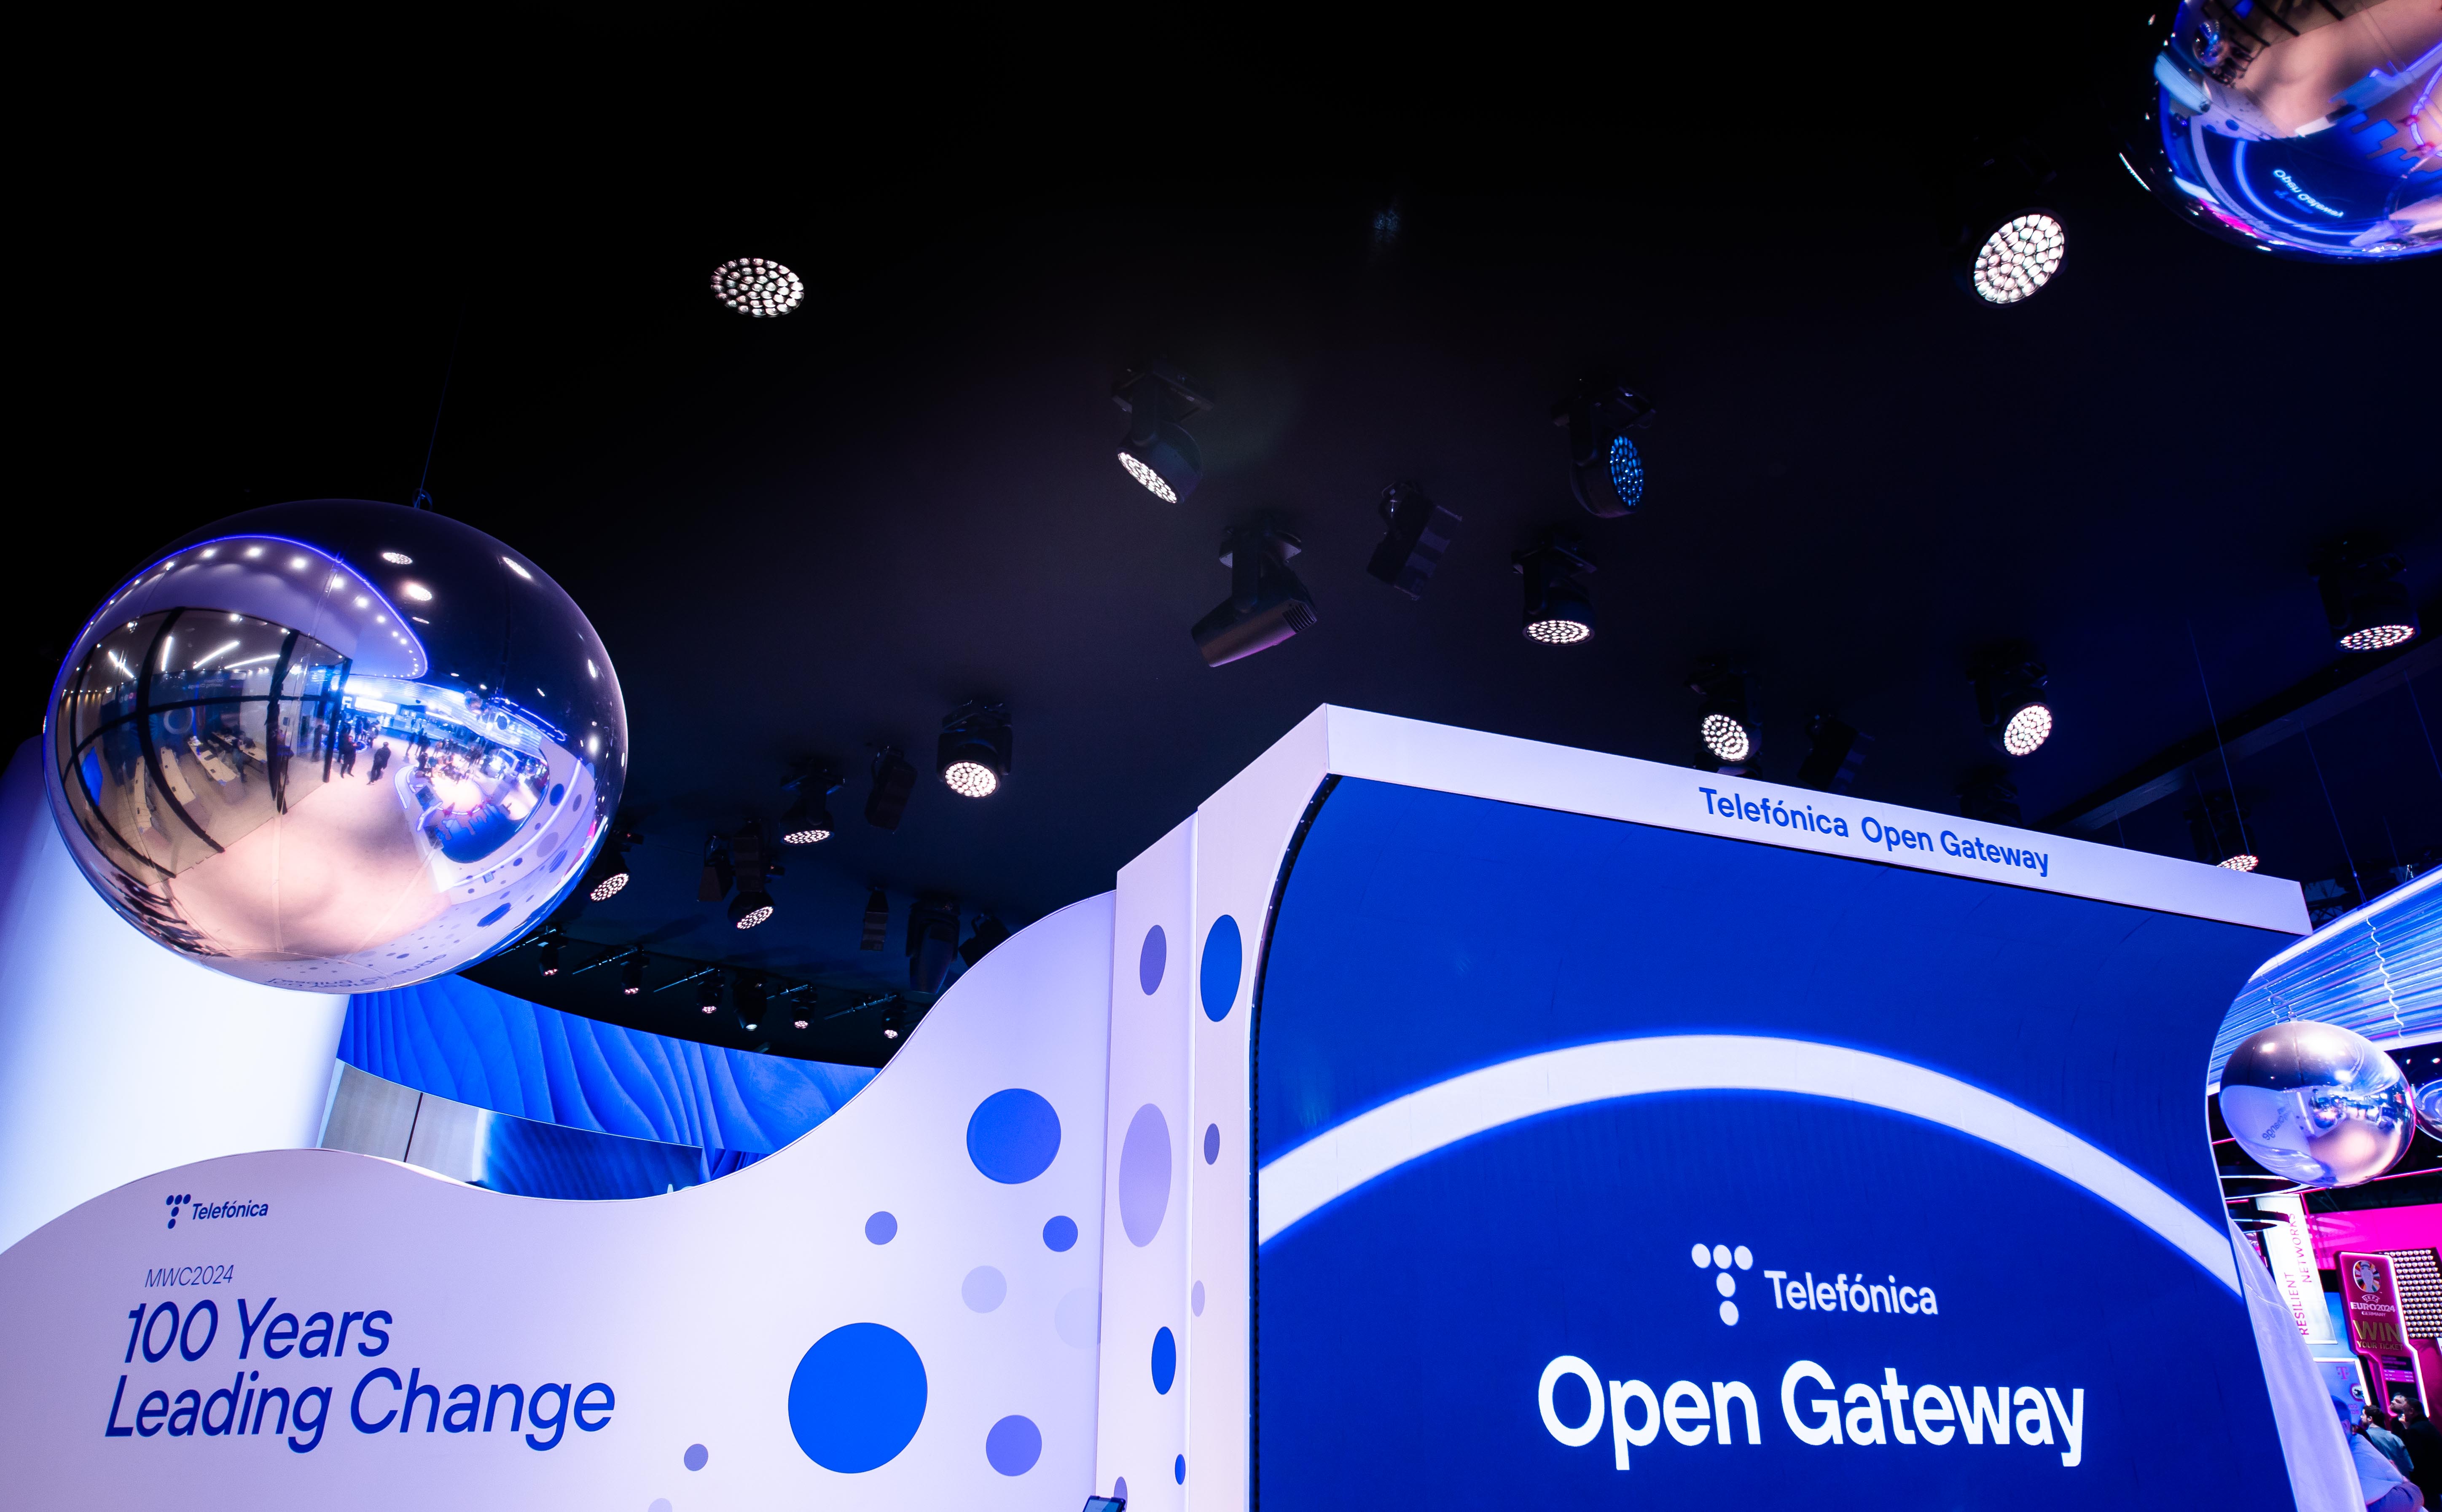 The Telefónica Open Gateway demo will showcase real-world use cases of how networks are transformed into developer-friendly platforms to power a new generation of digital services.